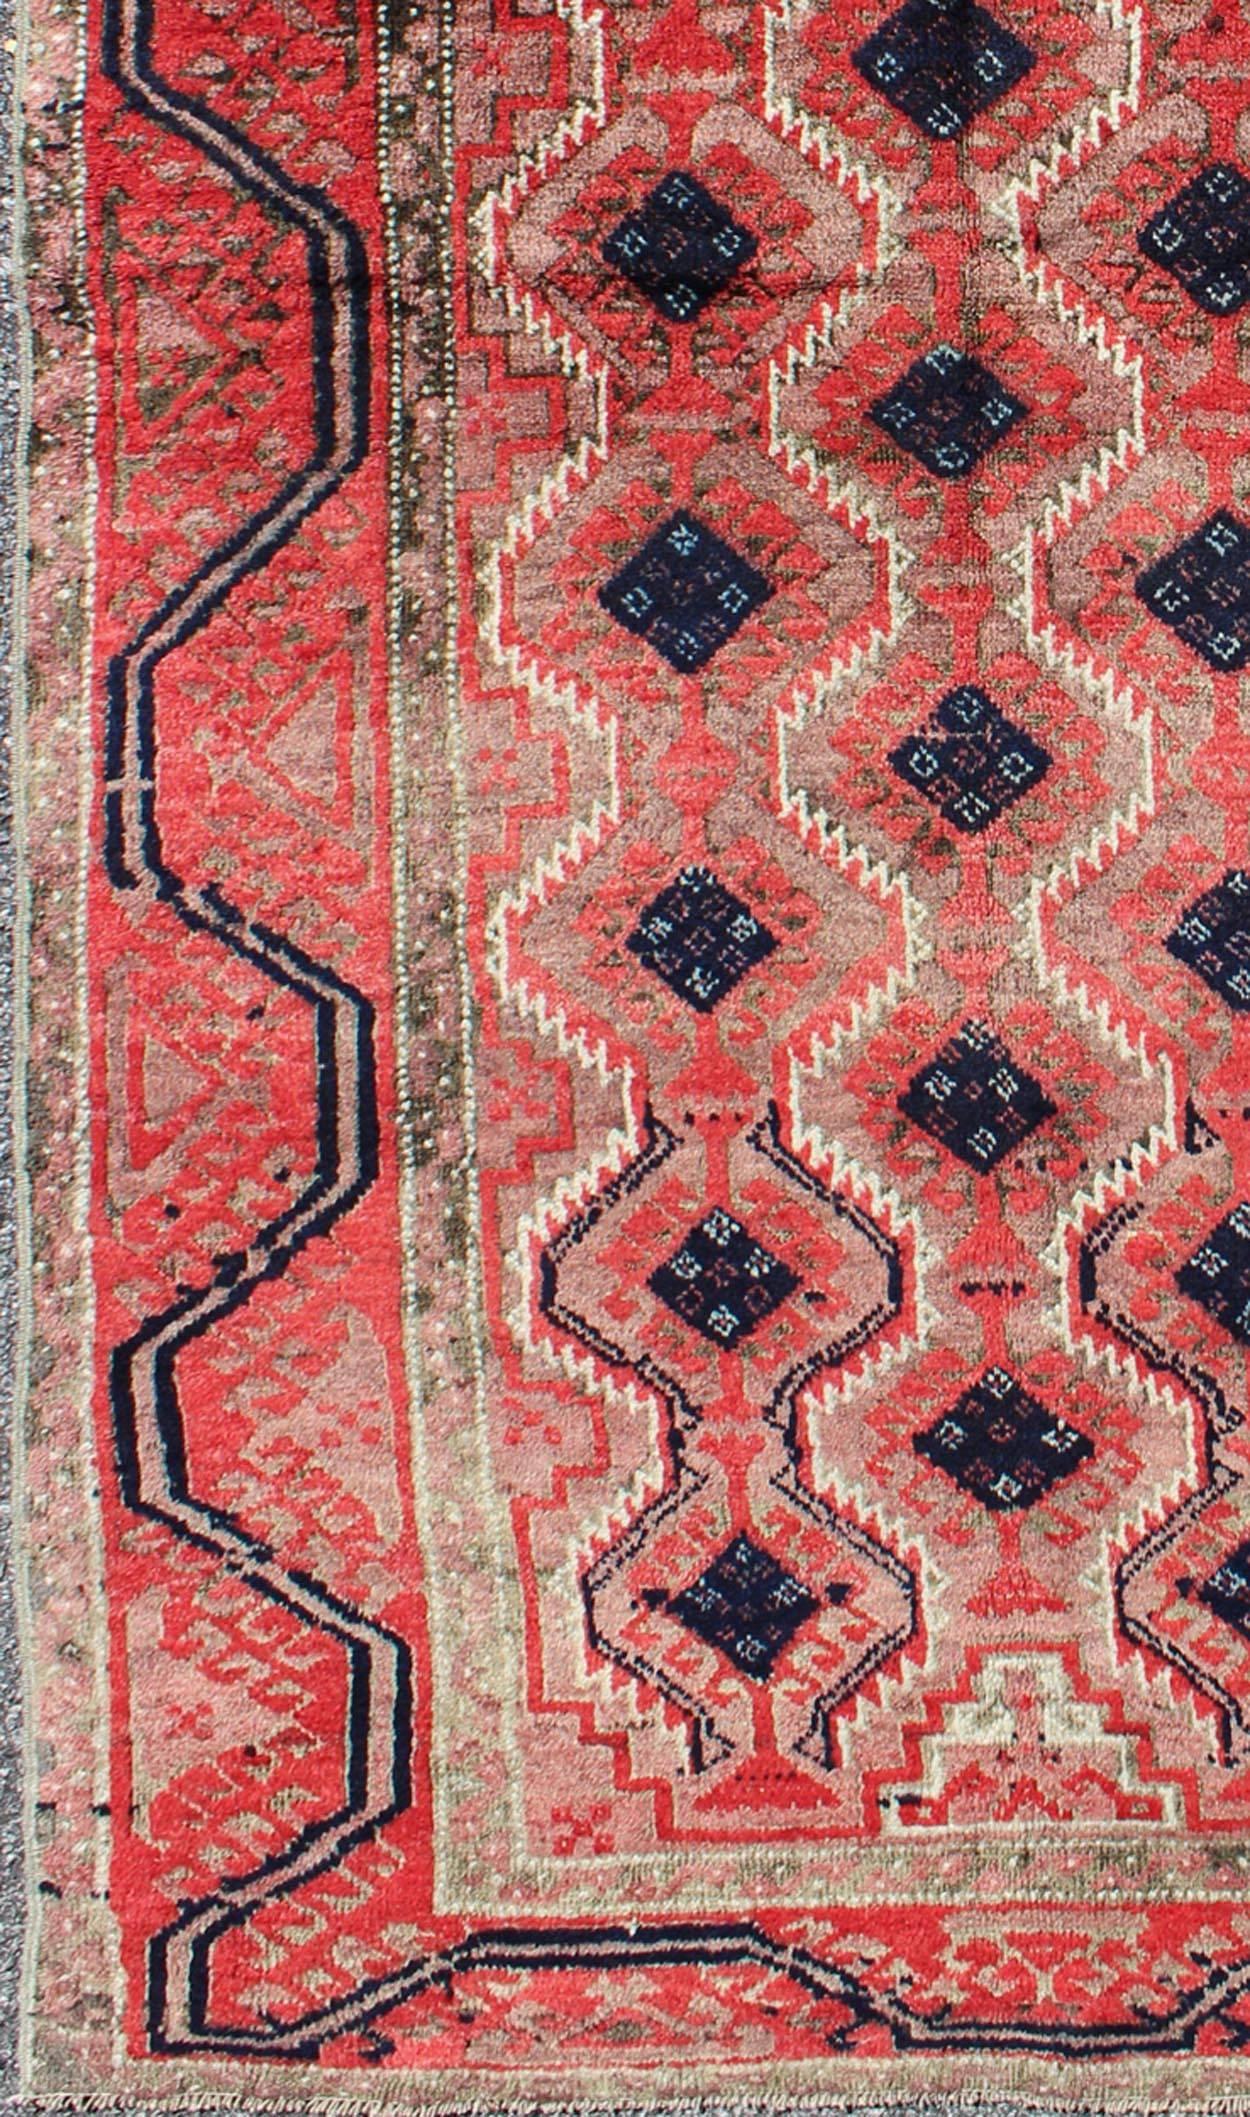 This impressive and complex vintage Afghan Beluch rug (circa mid-20th century) features an all-over diamond-shaped pattern flanked by geometric motifs in the borders. Colors include various shades of red, taupe, ivory, gray, and charcoal.

Measures: